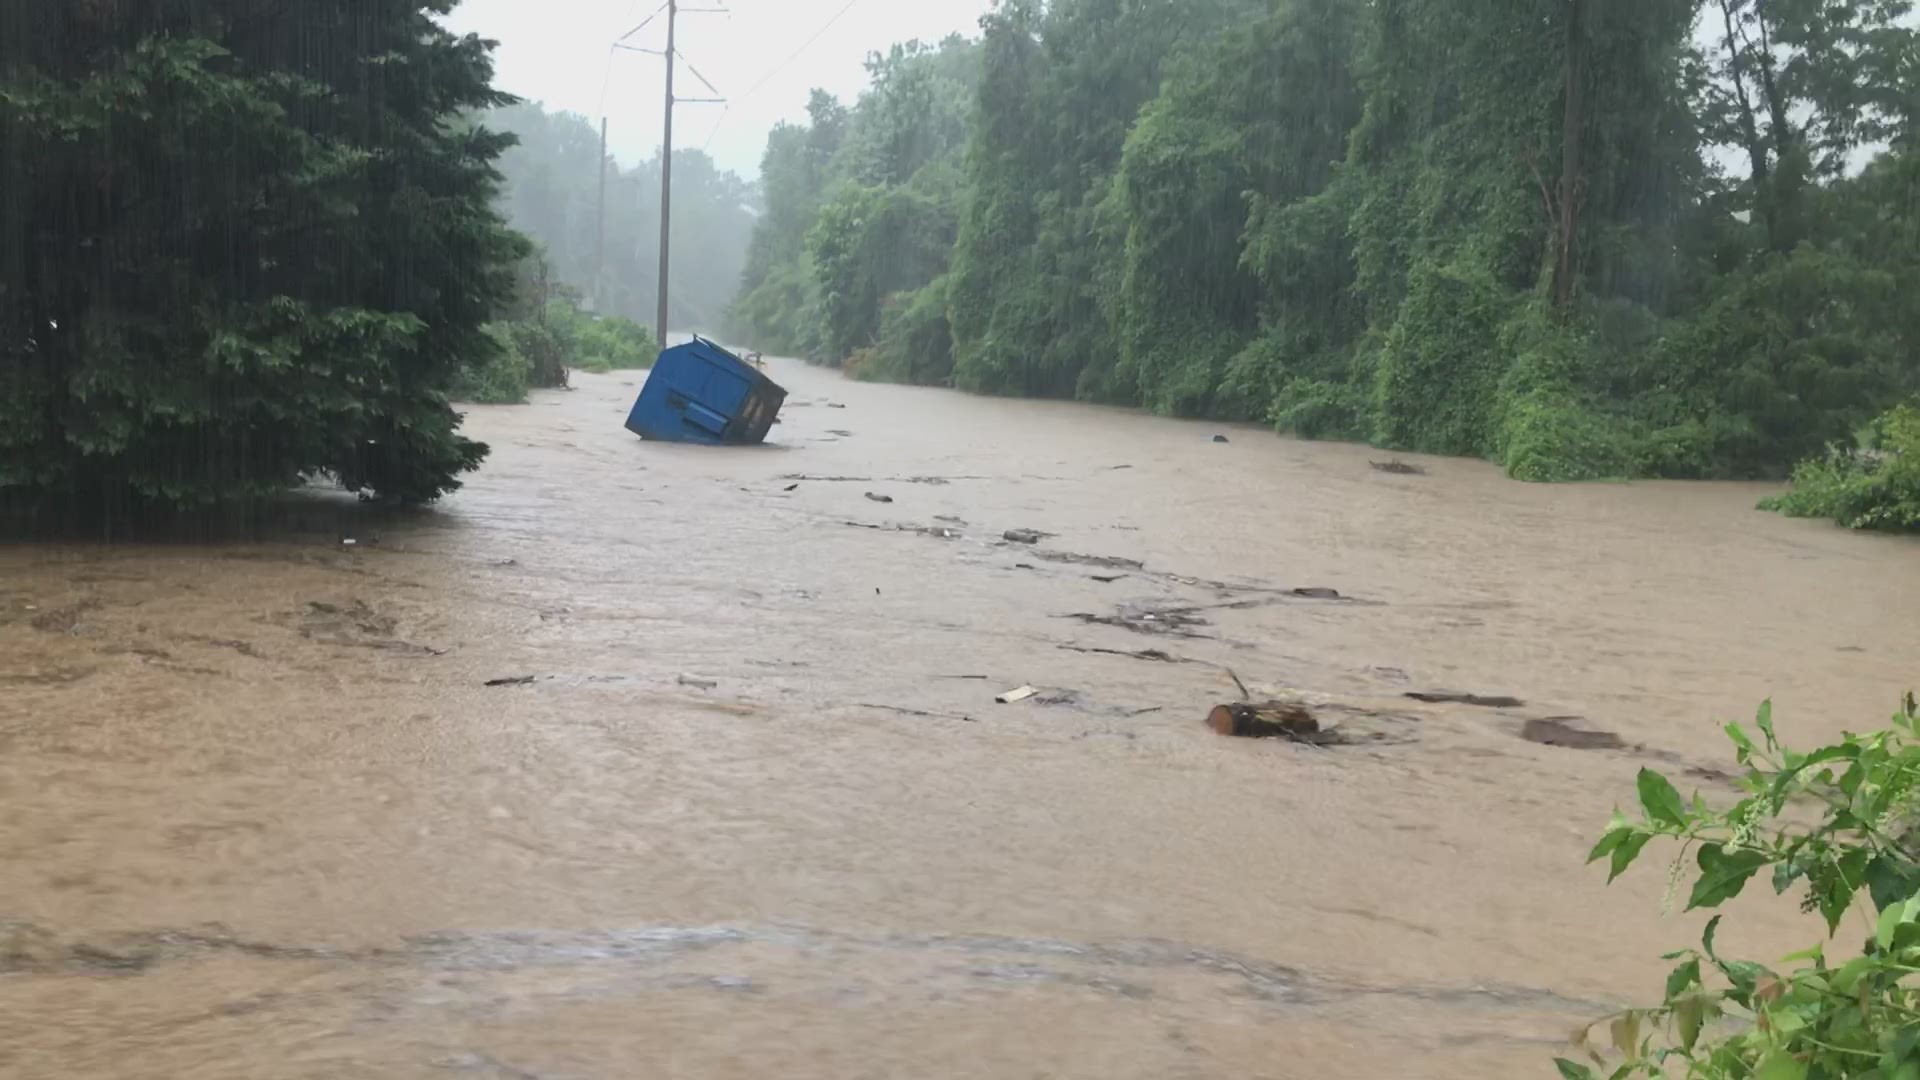 A dumpster was carried away in flood waters in McLean, Virginia after heavy storms slammed into the DMV on Monday. Rain fell at a rate of three to four inches an hour.